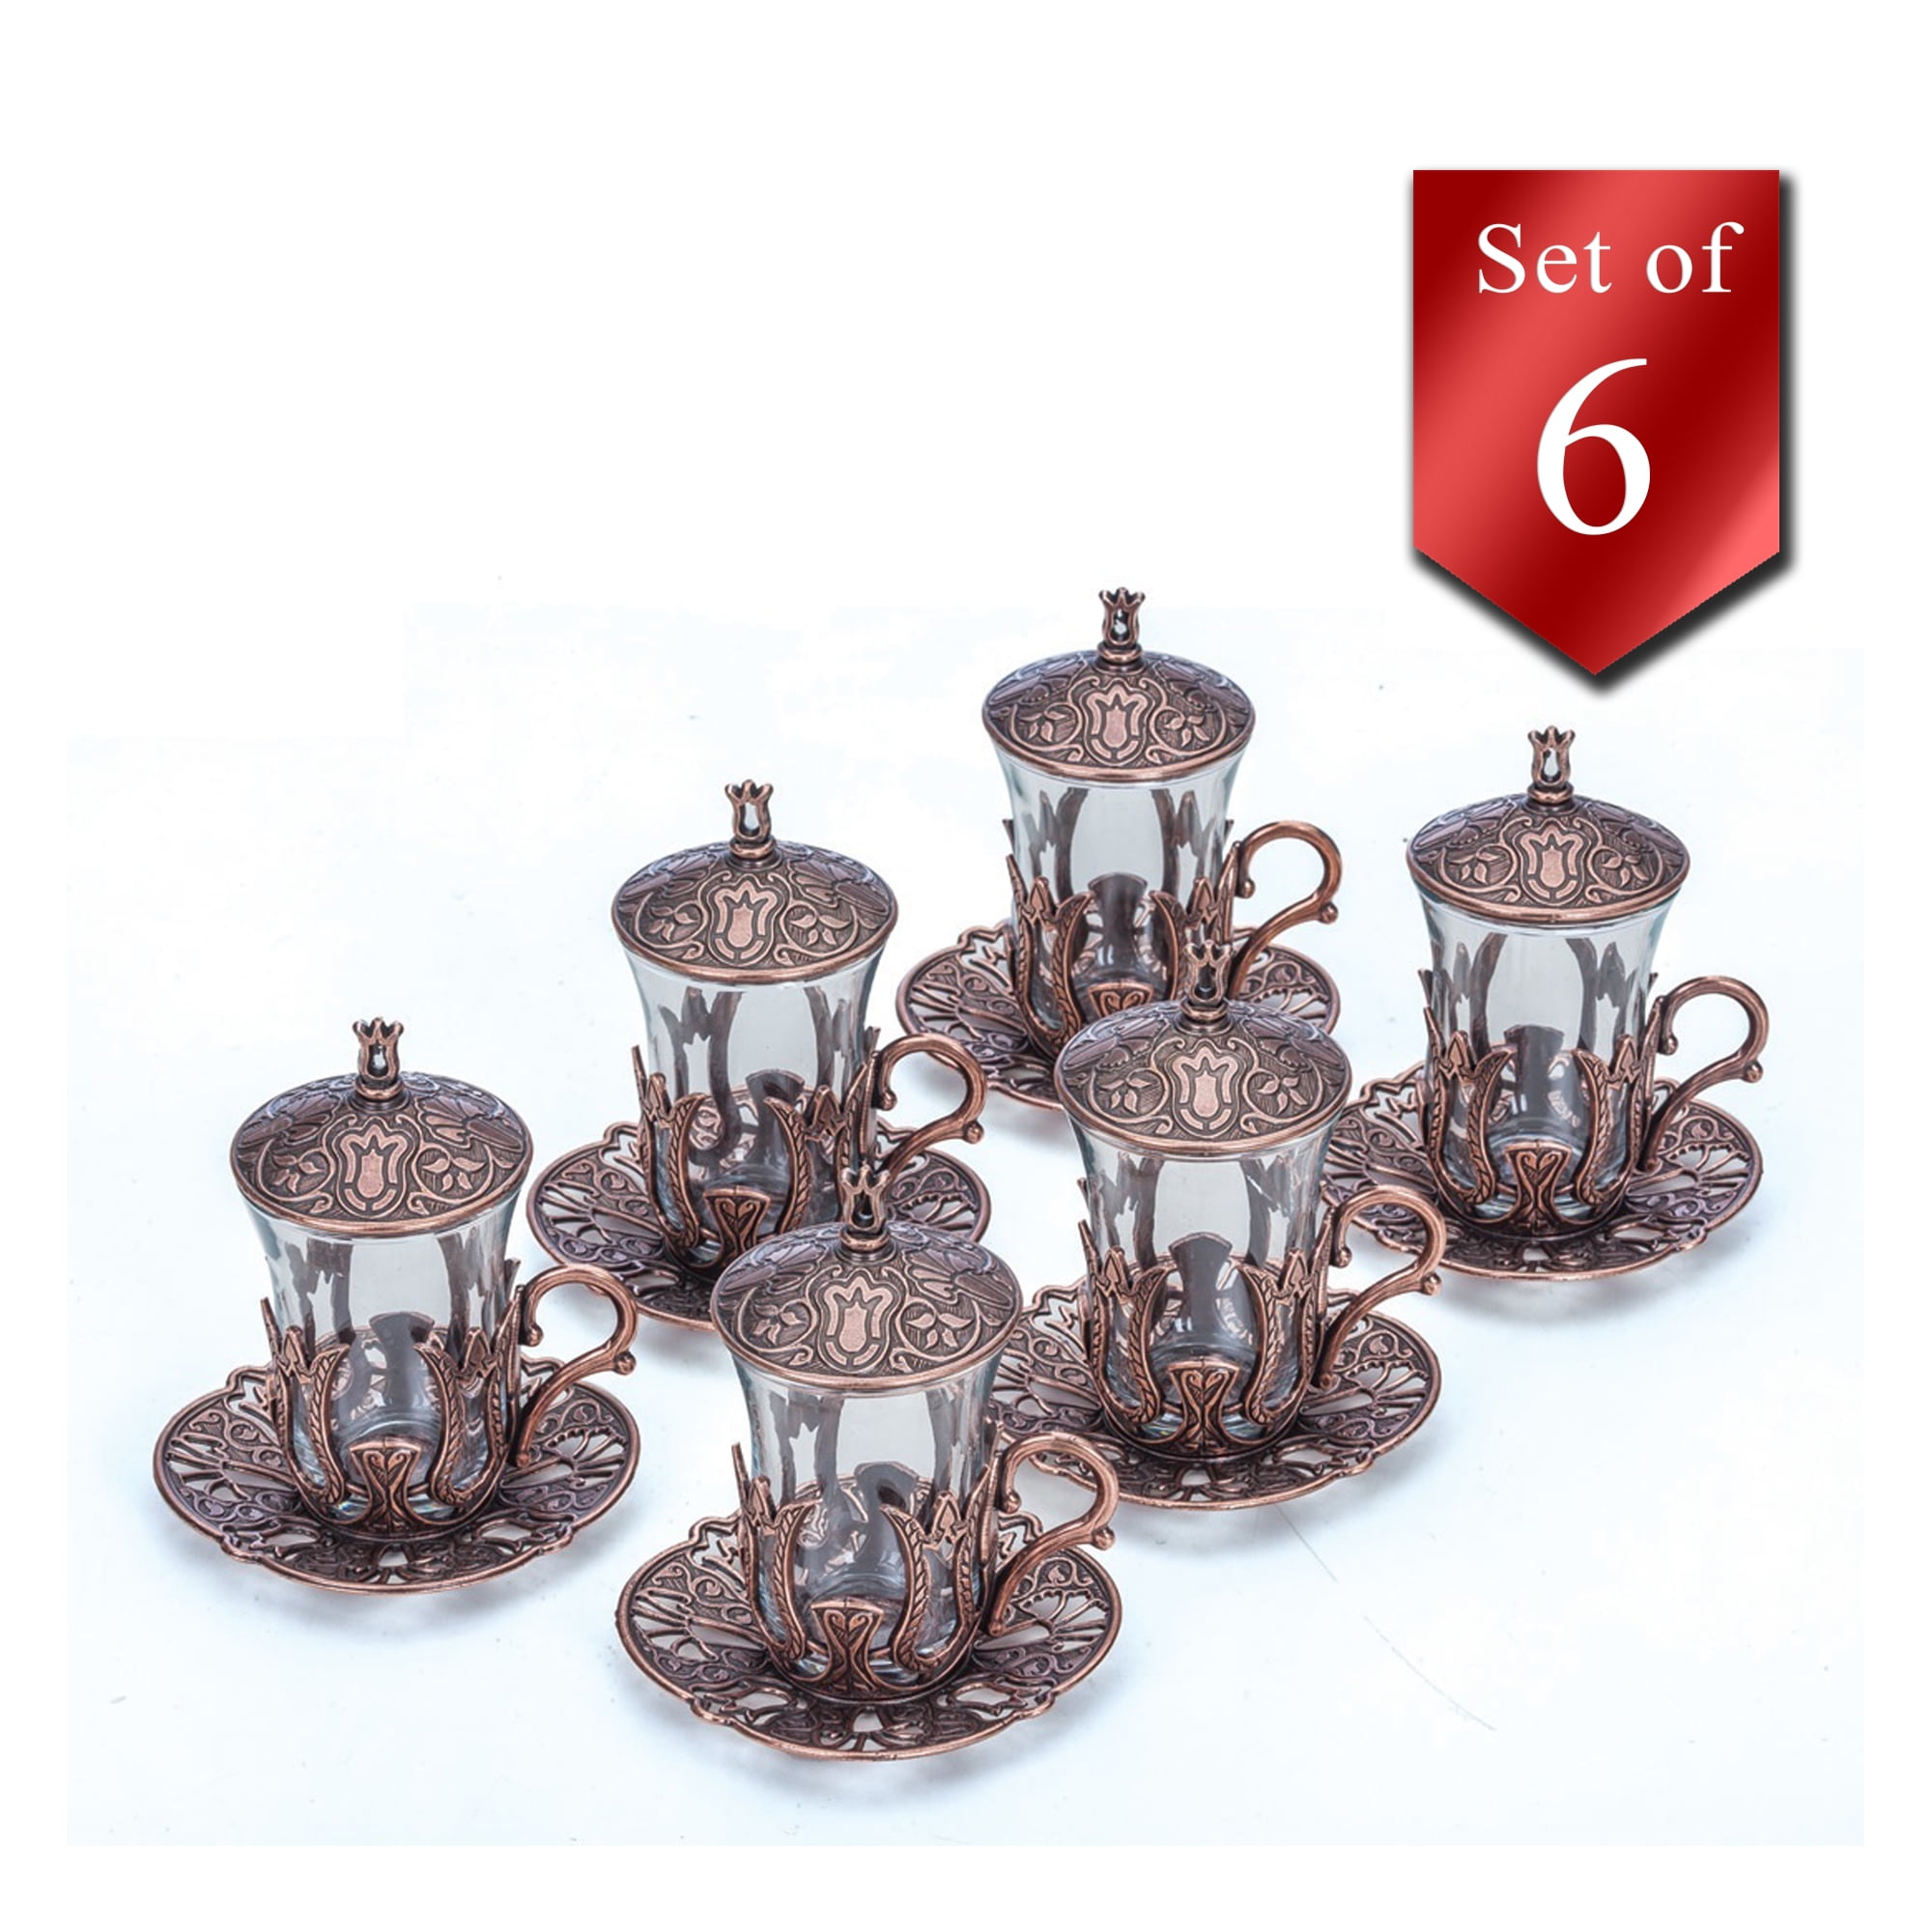 Details about   Luxury Metal Plate Elegant Vintage Cup Stand Holder Silver Gold Cup Saucer Gift 